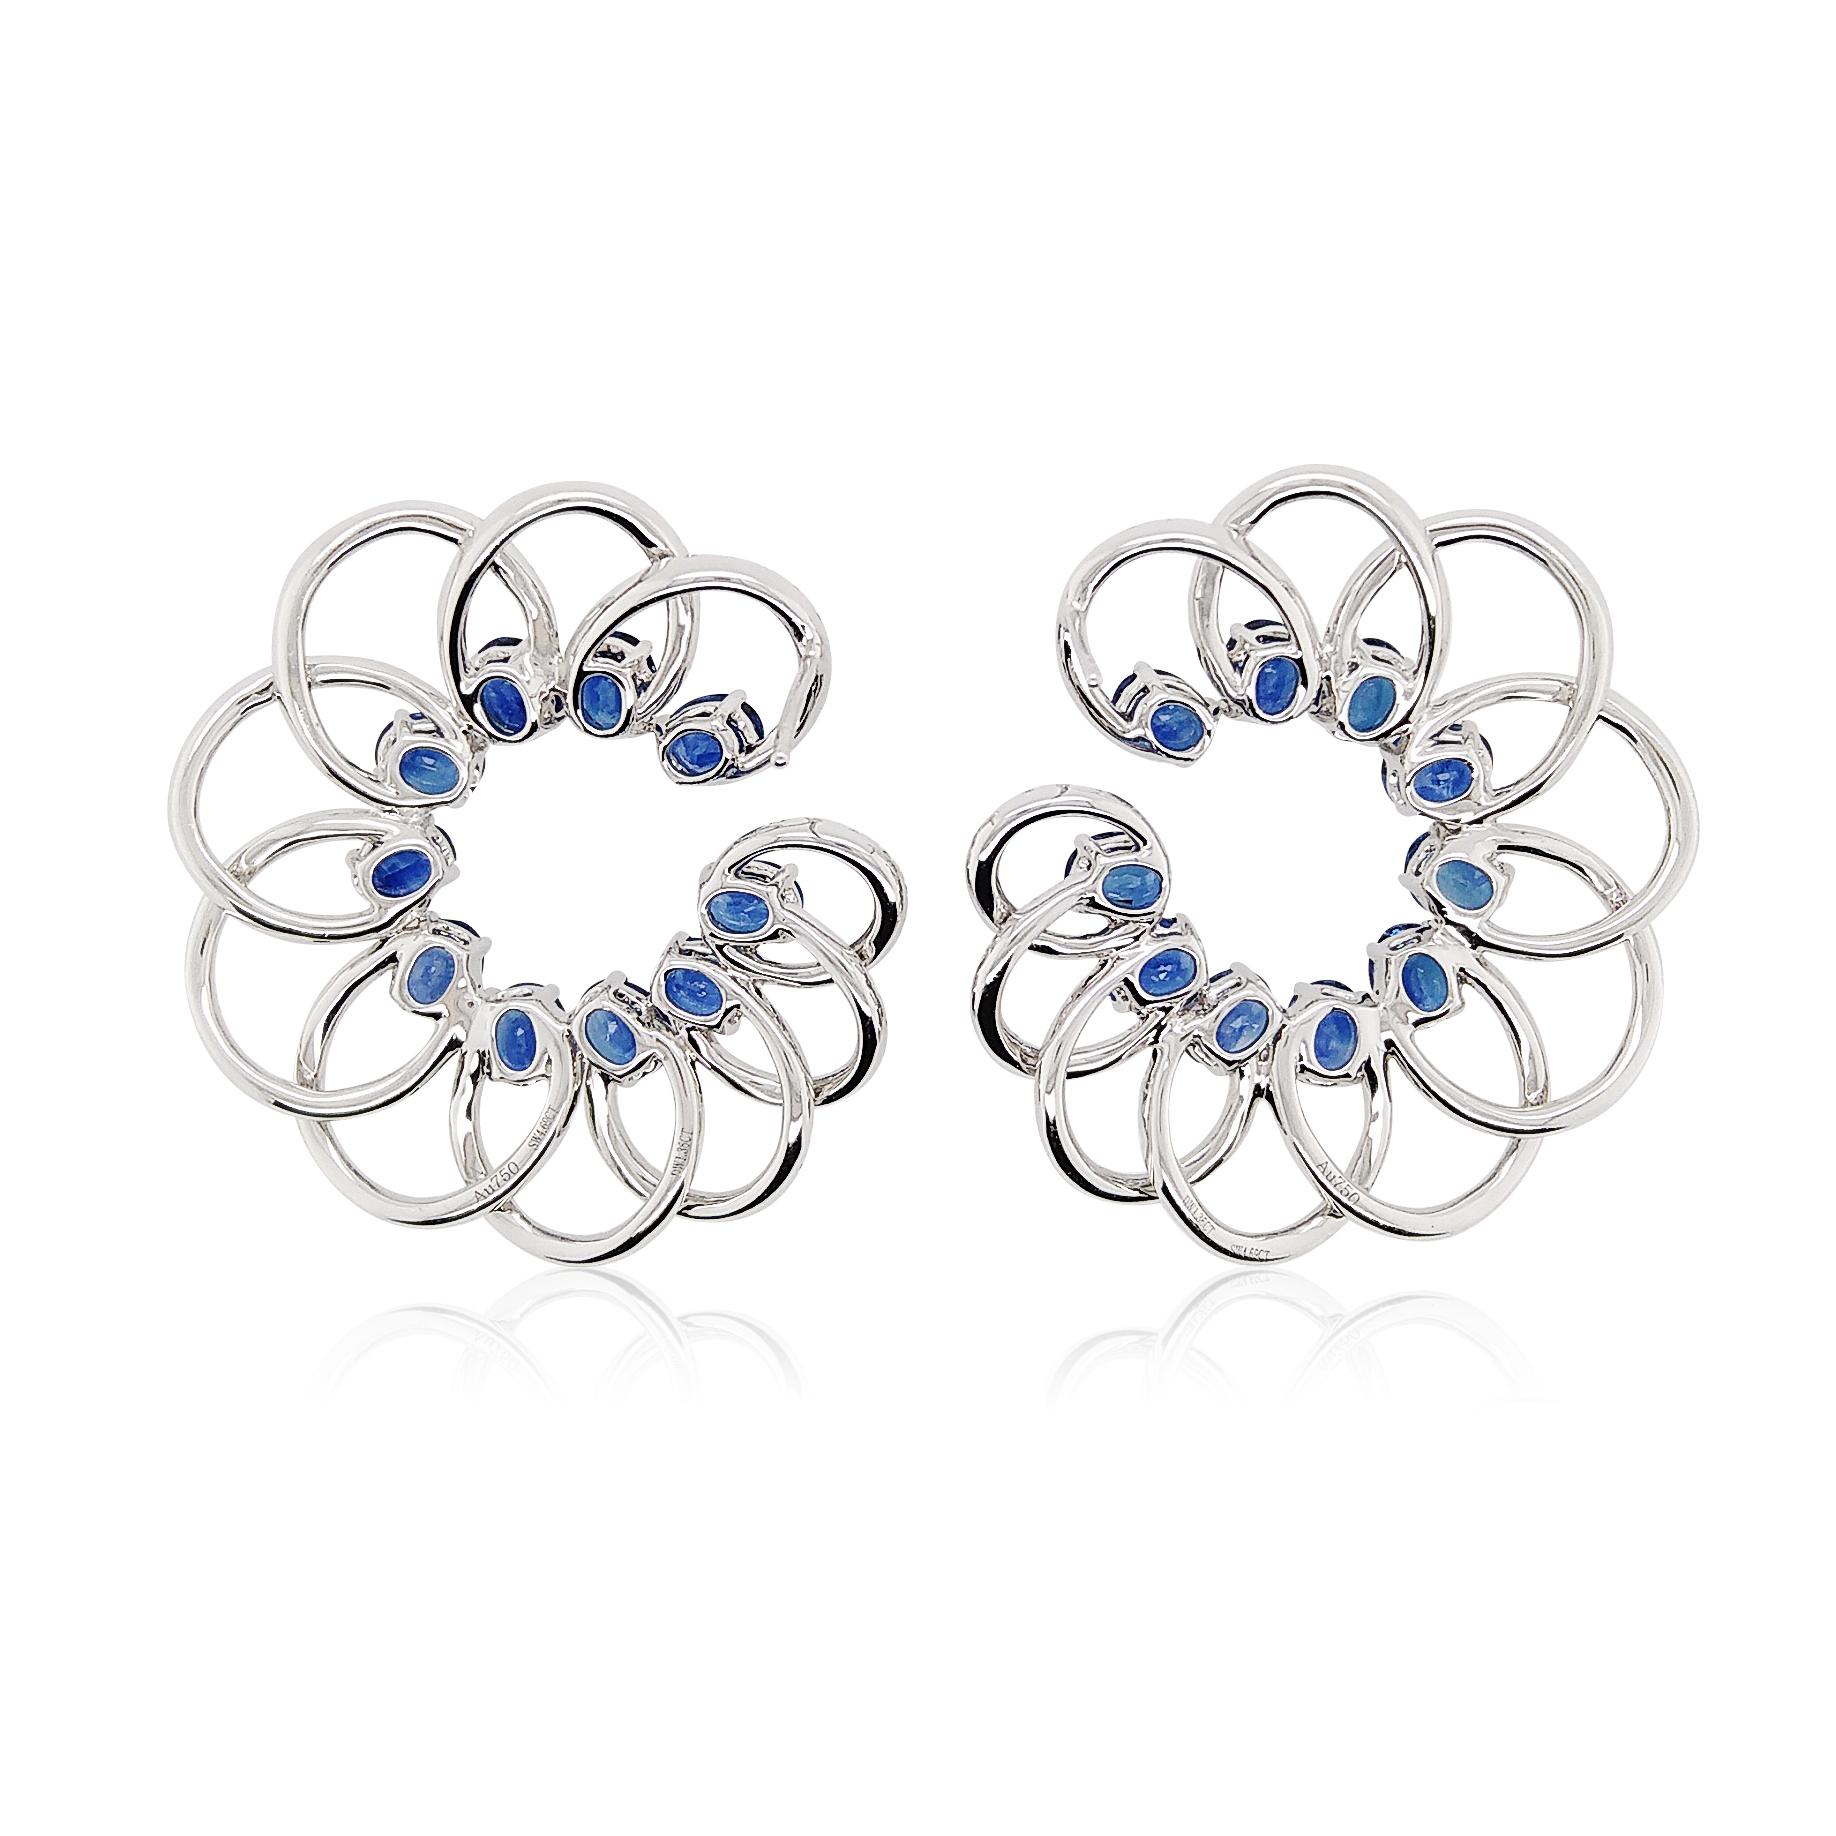 These contemporary earrings combine vibrant Sri Lankan Sapphires with the vivid tones of rich Blue and sparkling White Diamonds. Putting style at the forefront of their design, these unique earrings offer a contemporary way to wear Sapphires –